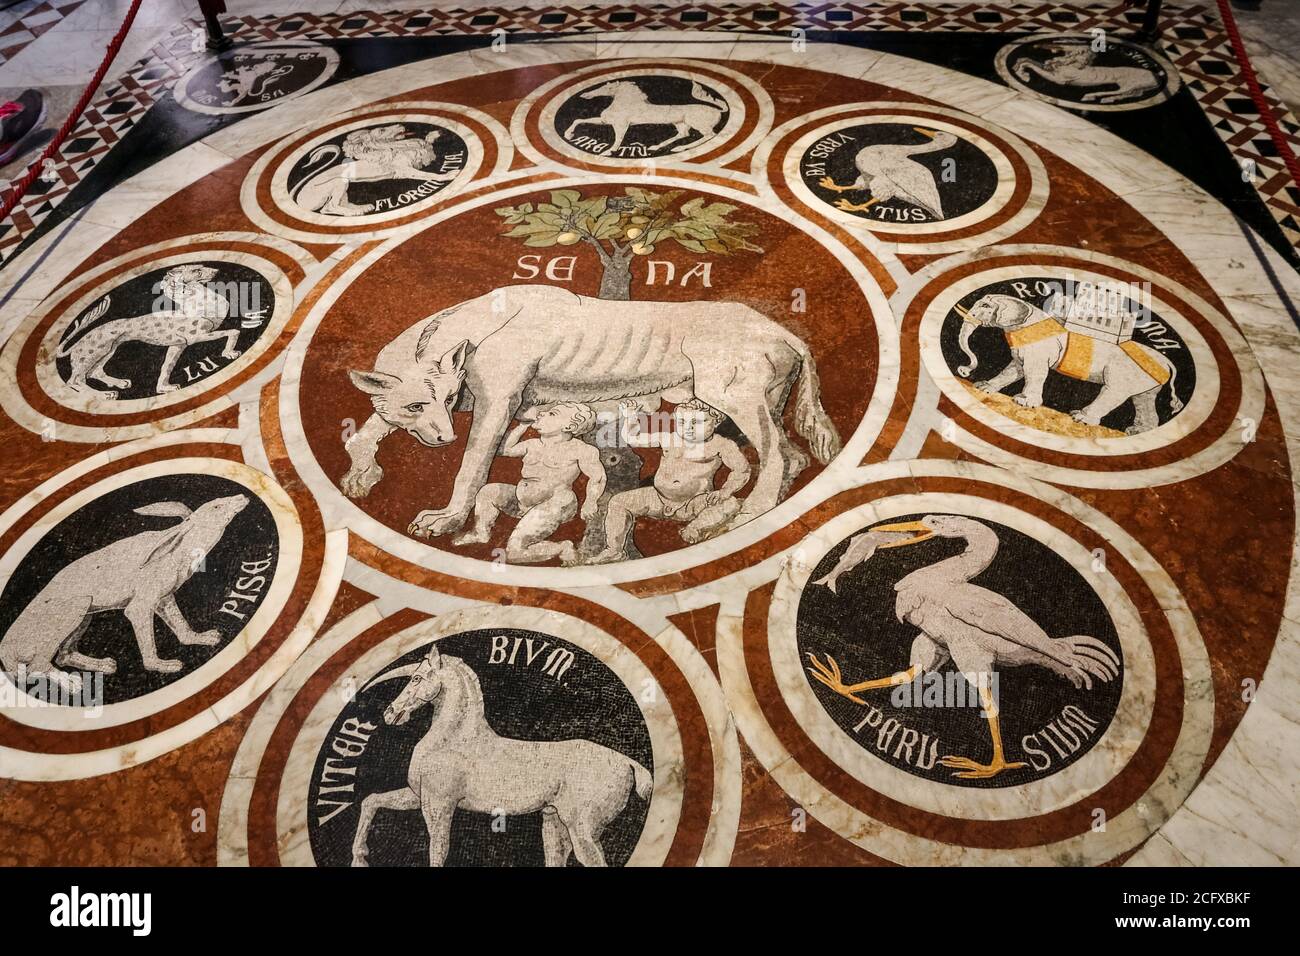 Marvelous close-up view of the inlaid marble mosaic floor of the Duomo di Siena depicting the She-Wolf of Siena with the emblems of the confederate... Stock Photo